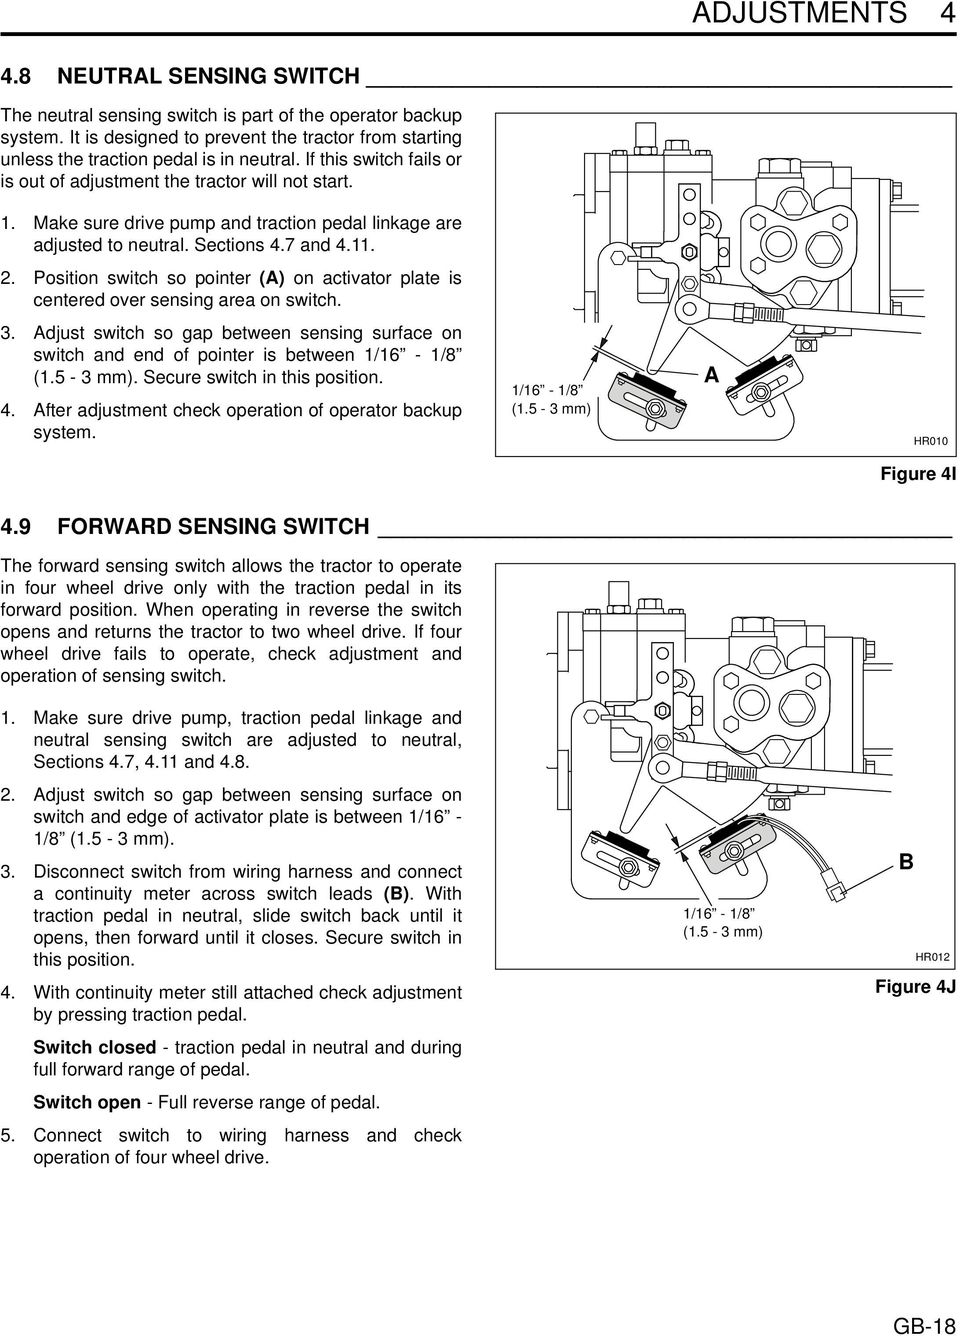 Position switch so pointer (A) on activator plate is centered over sensing area on switch. 3. Adjust switch so gap between sensing surface on switch and end of pointer is between 1/16-1/8 (1.5-3 mm).